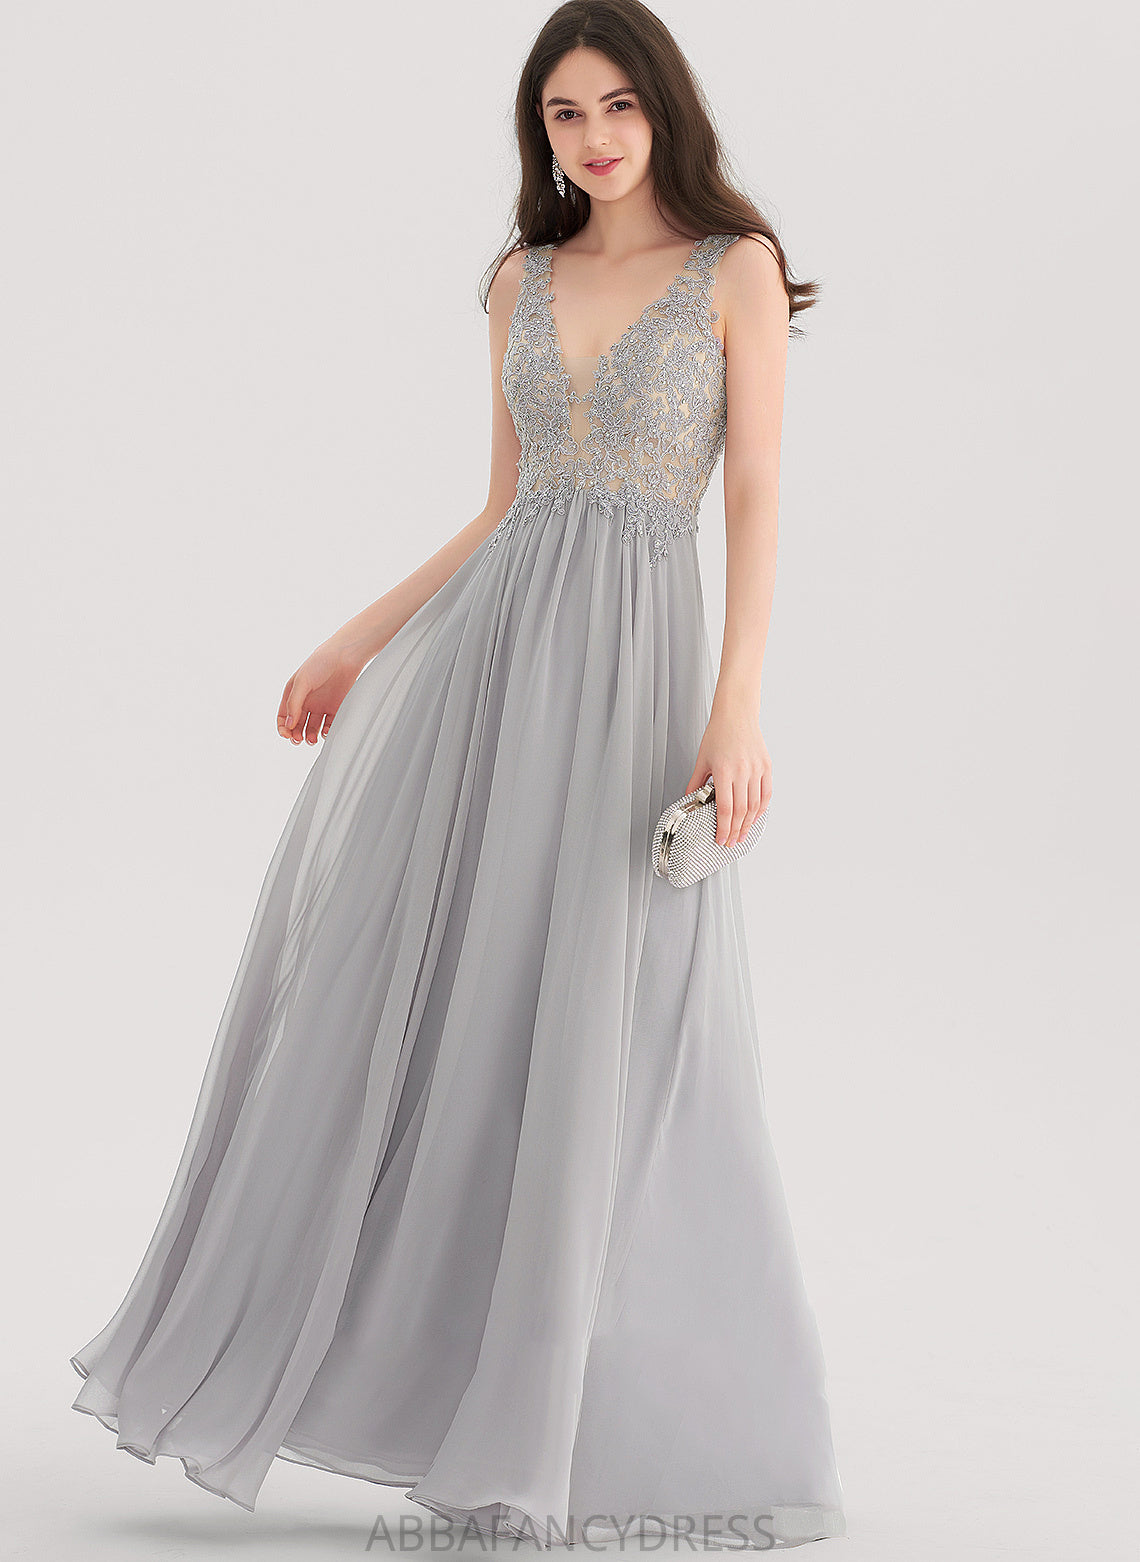 Lea V-neck Beading Sequins With Prom Dresses Floor-Length A-Line Chiffon